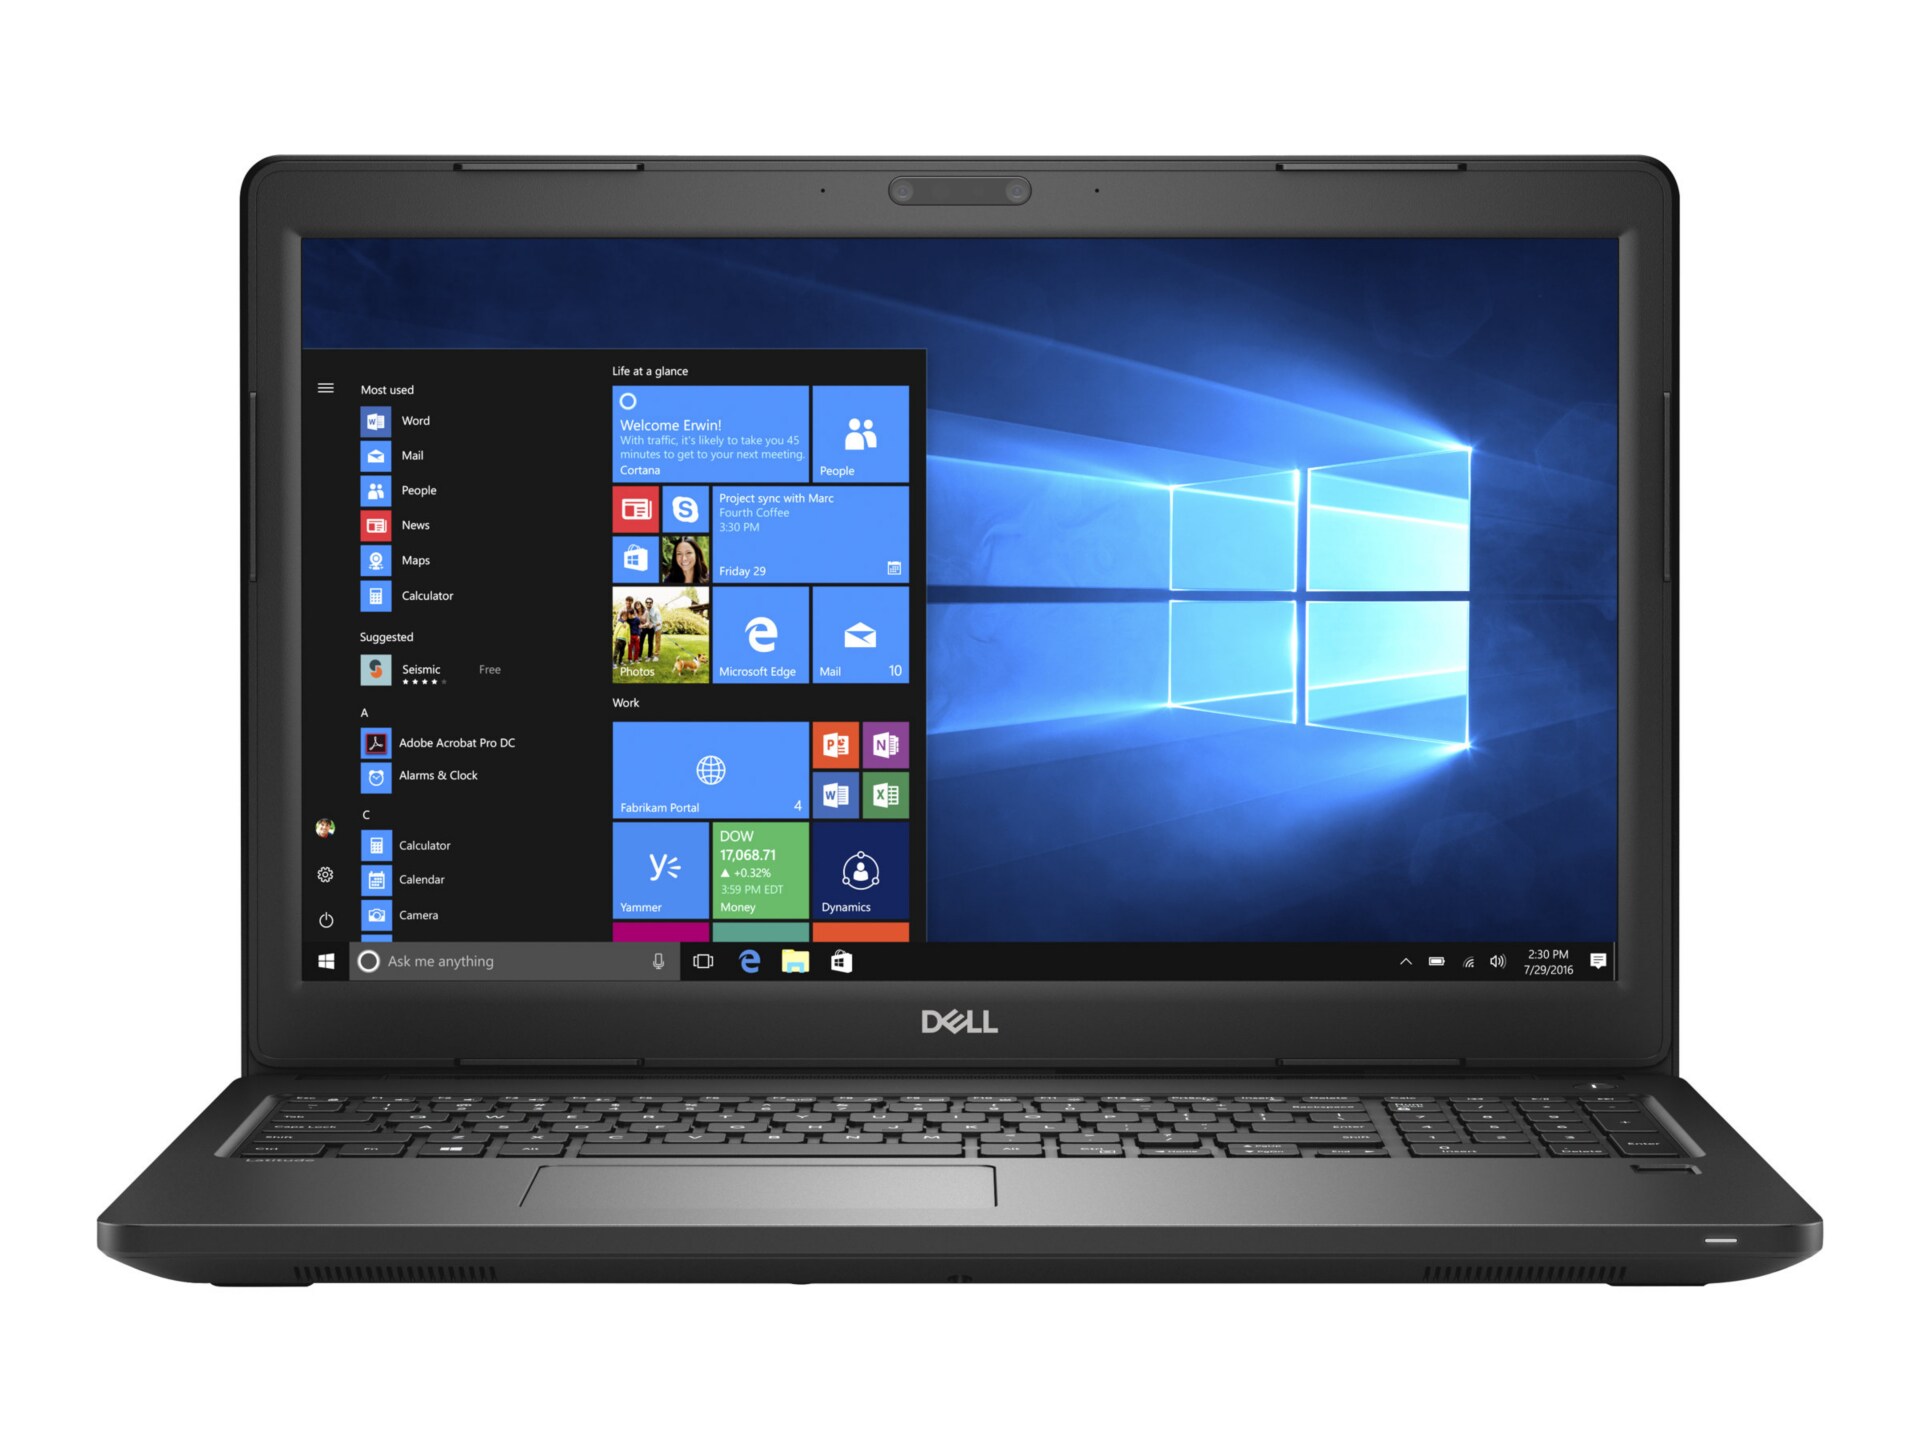 Dell Latitude 3580 - 15.6" - $50 Instant Savings Included Through 02/03